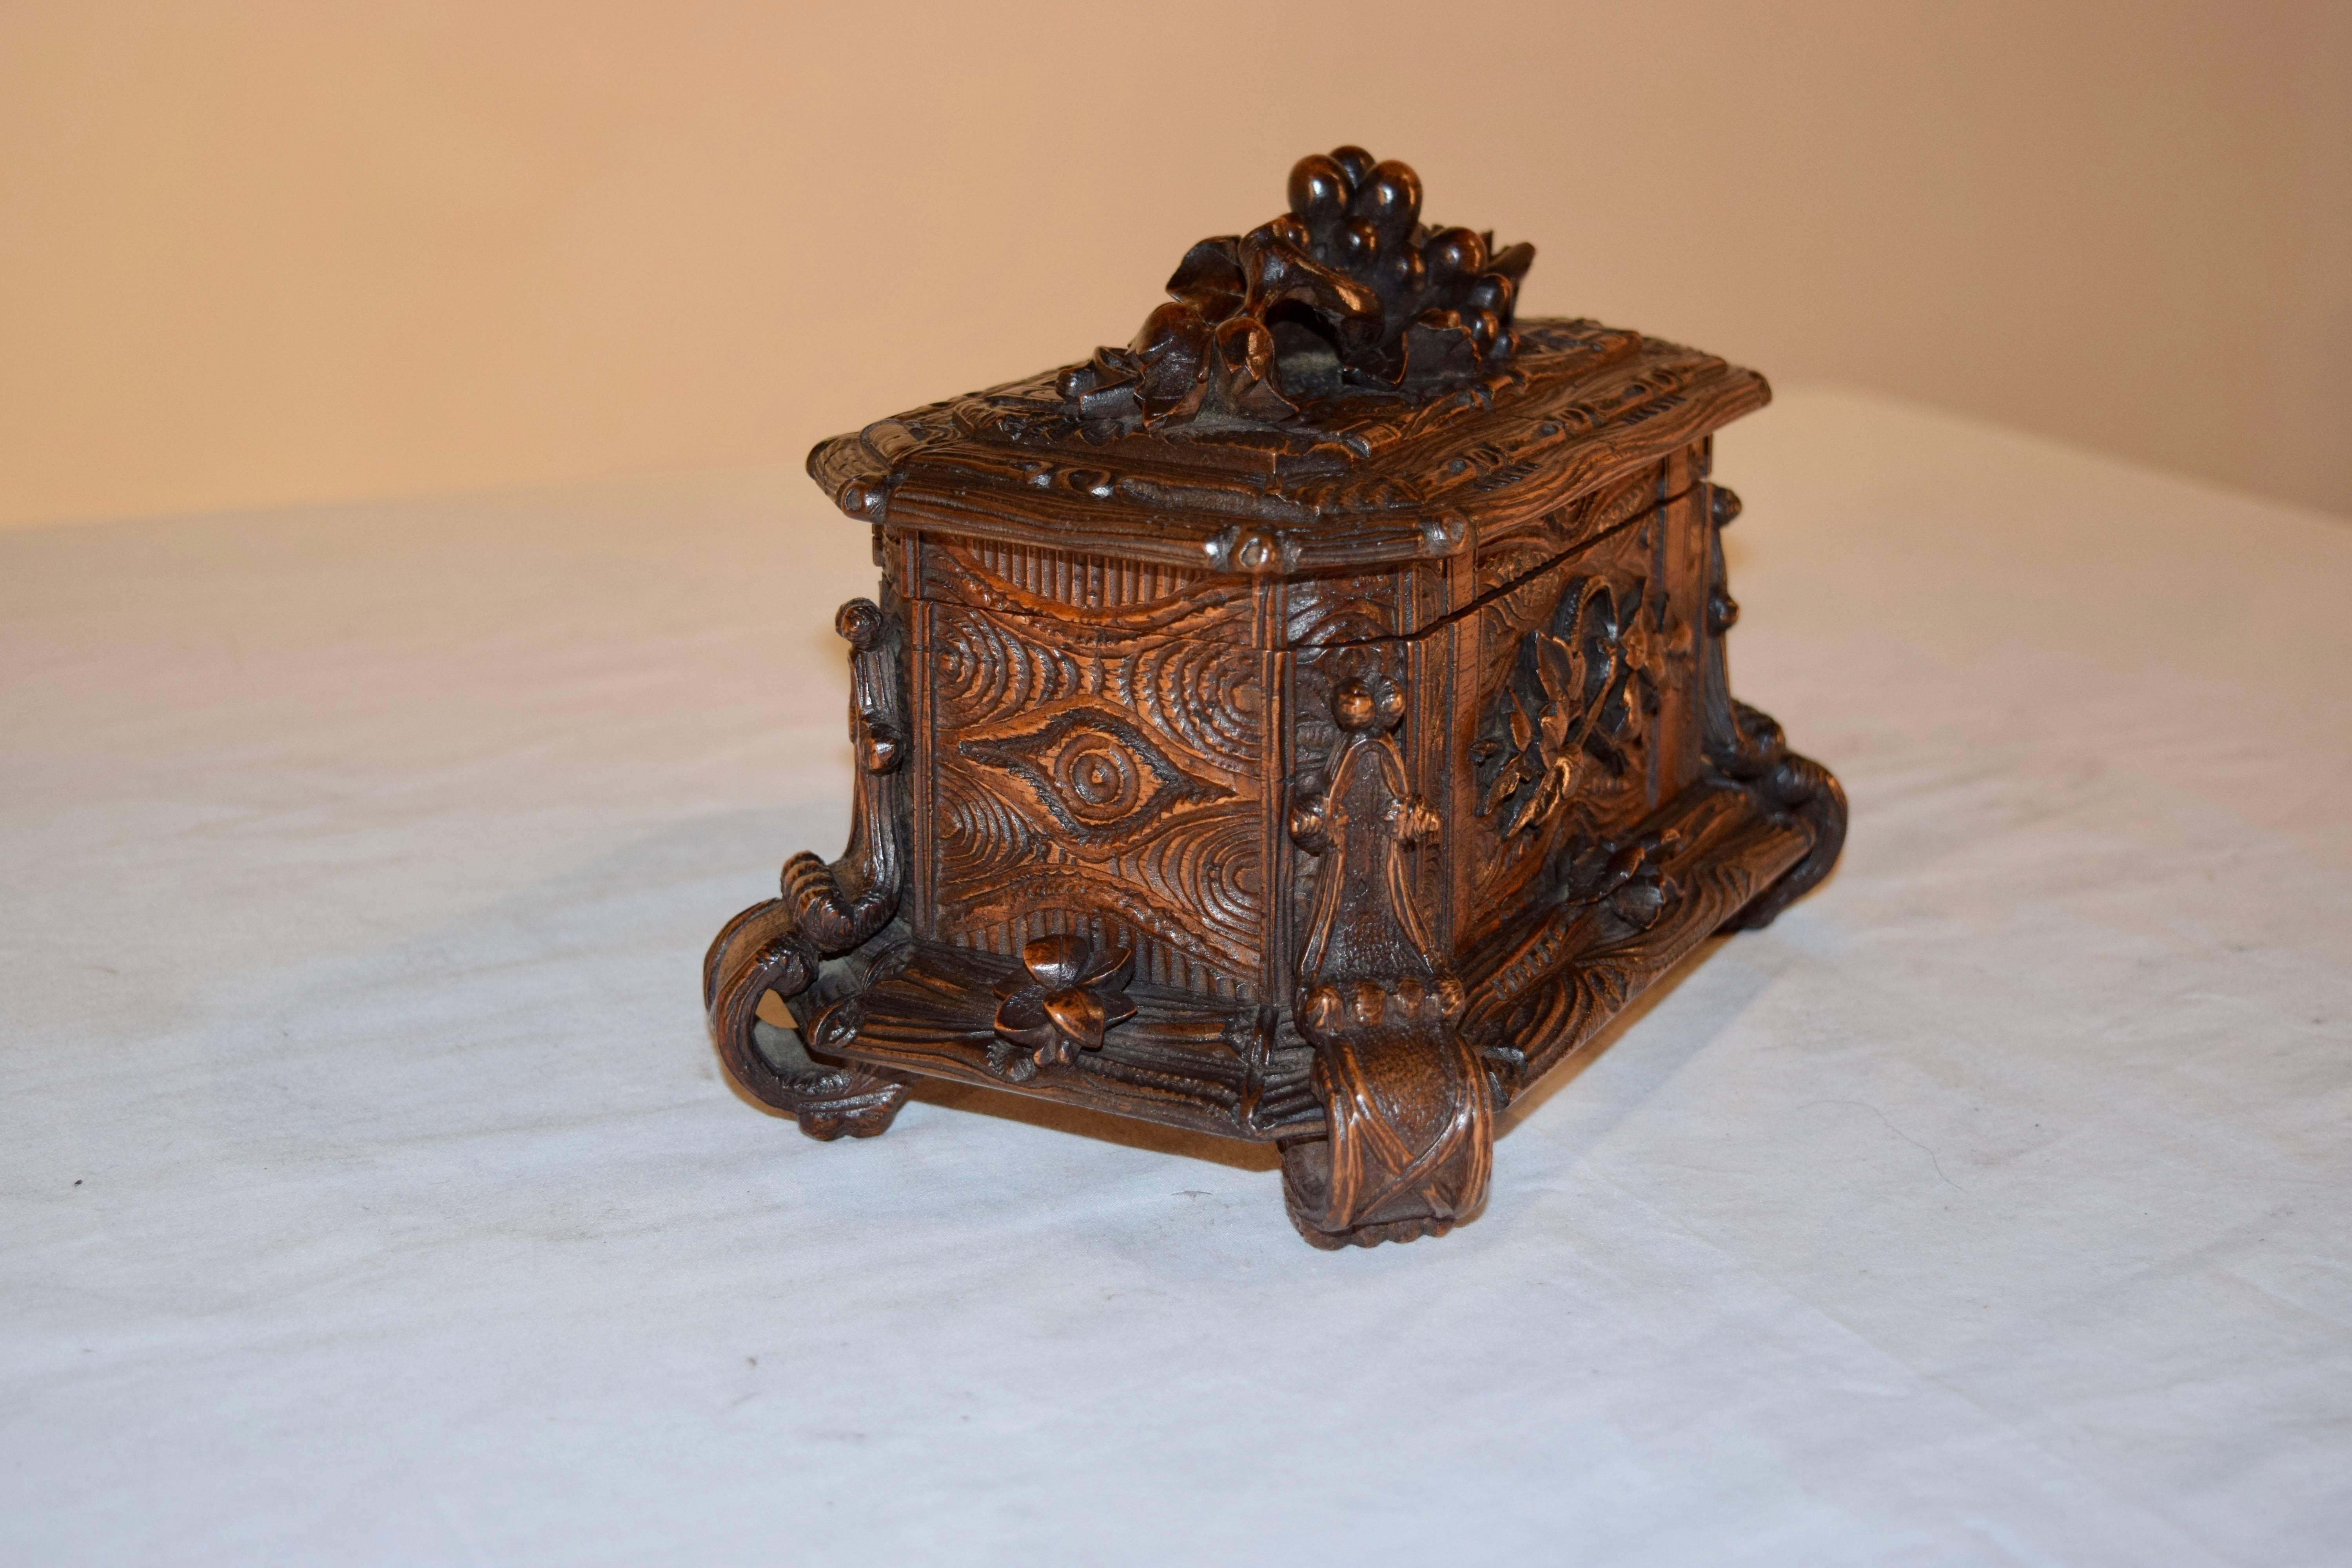 19th century Black Forest carved box with gorgeously carved sides and top. The box has patterns of straps and wood patterns, decorated further with grapes, twigs, and leaves. It retains the original velvet lining. No key is present.